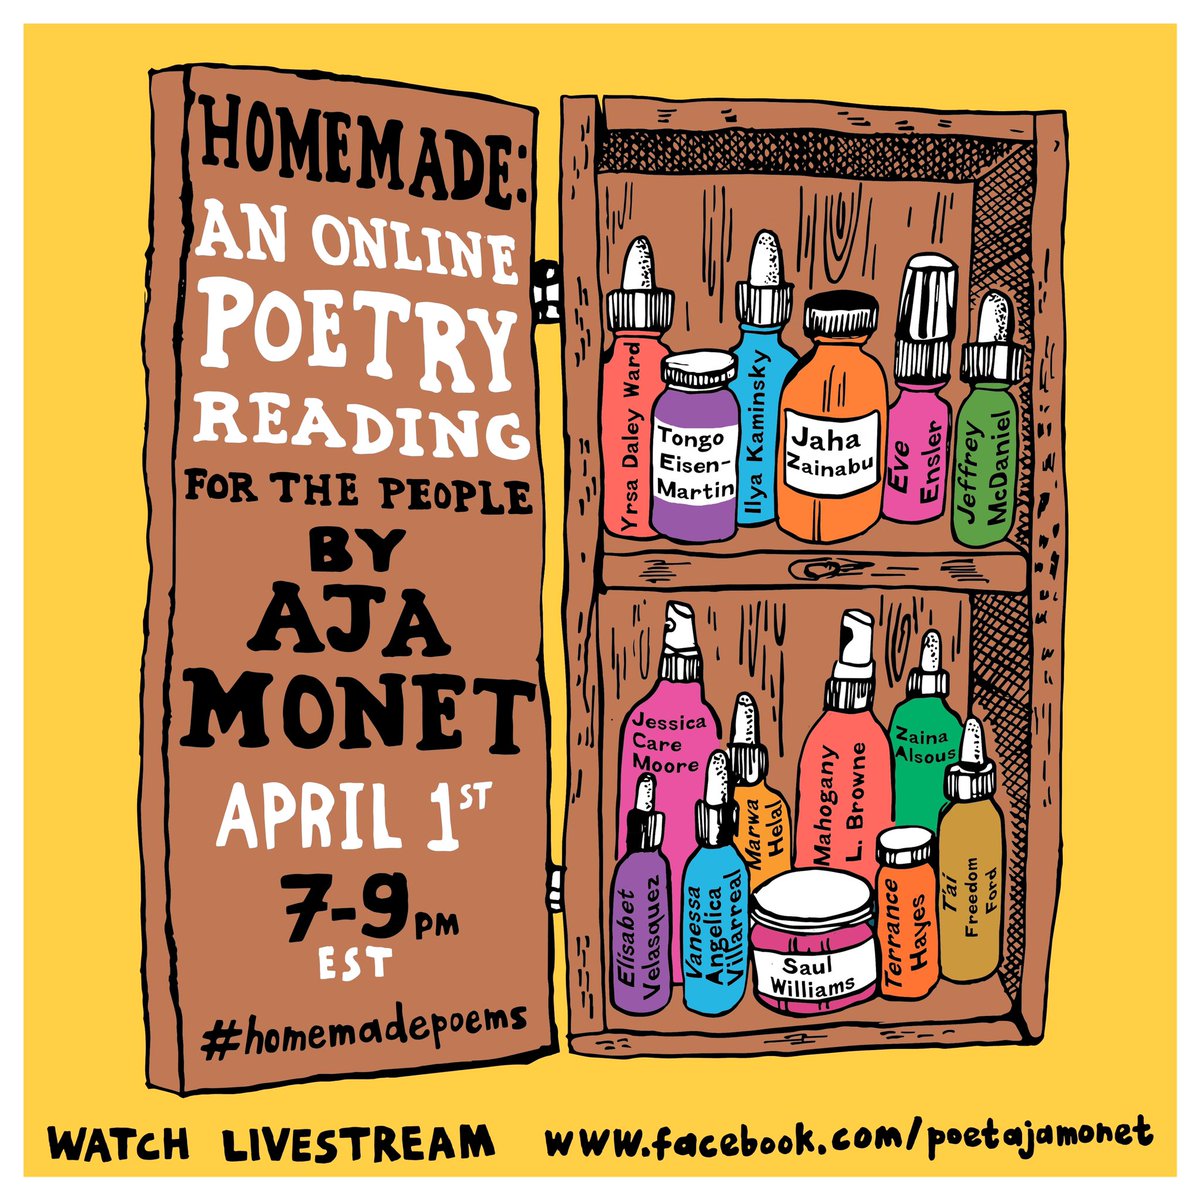 Dear Friends,
I’m organizing a virtual online reading series called, “Homemade: Poetic Remedies for the Times.”  SAVE THE DATE. APRIL 1st 7-9PM est. Each poet is a crucial ingredient in the collective remedy for our healing

@ilya_poet  #terrancehayes #eveensler &more.